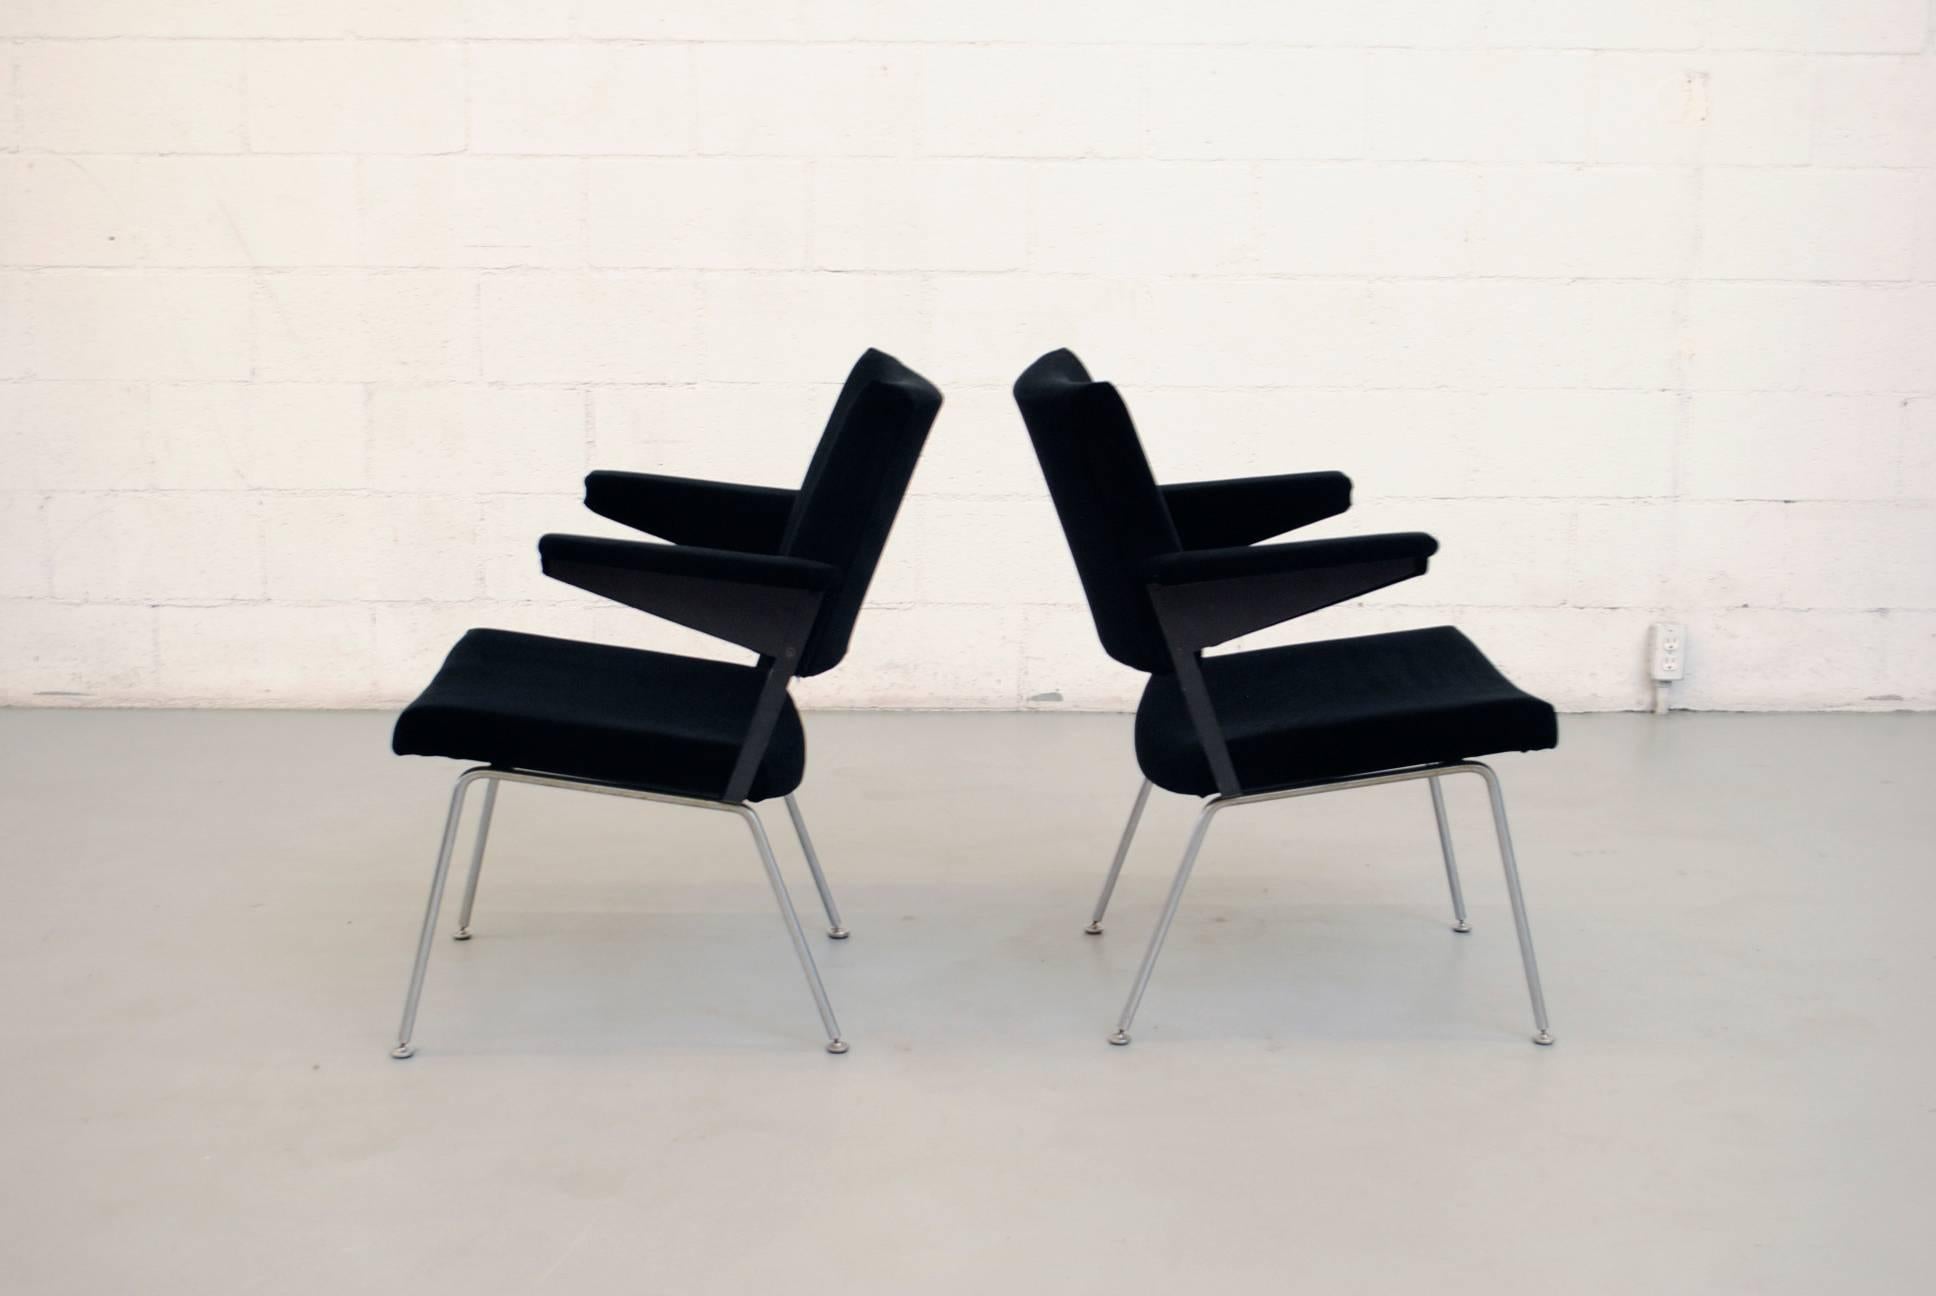 Cordemeyer designed, great architectural pair of chairs newly upholstered in black velvet with wide body, Prouve style arm rests, black enameled metal frame and brushed steel legs. This particular model is a lower office lounge chair version of the